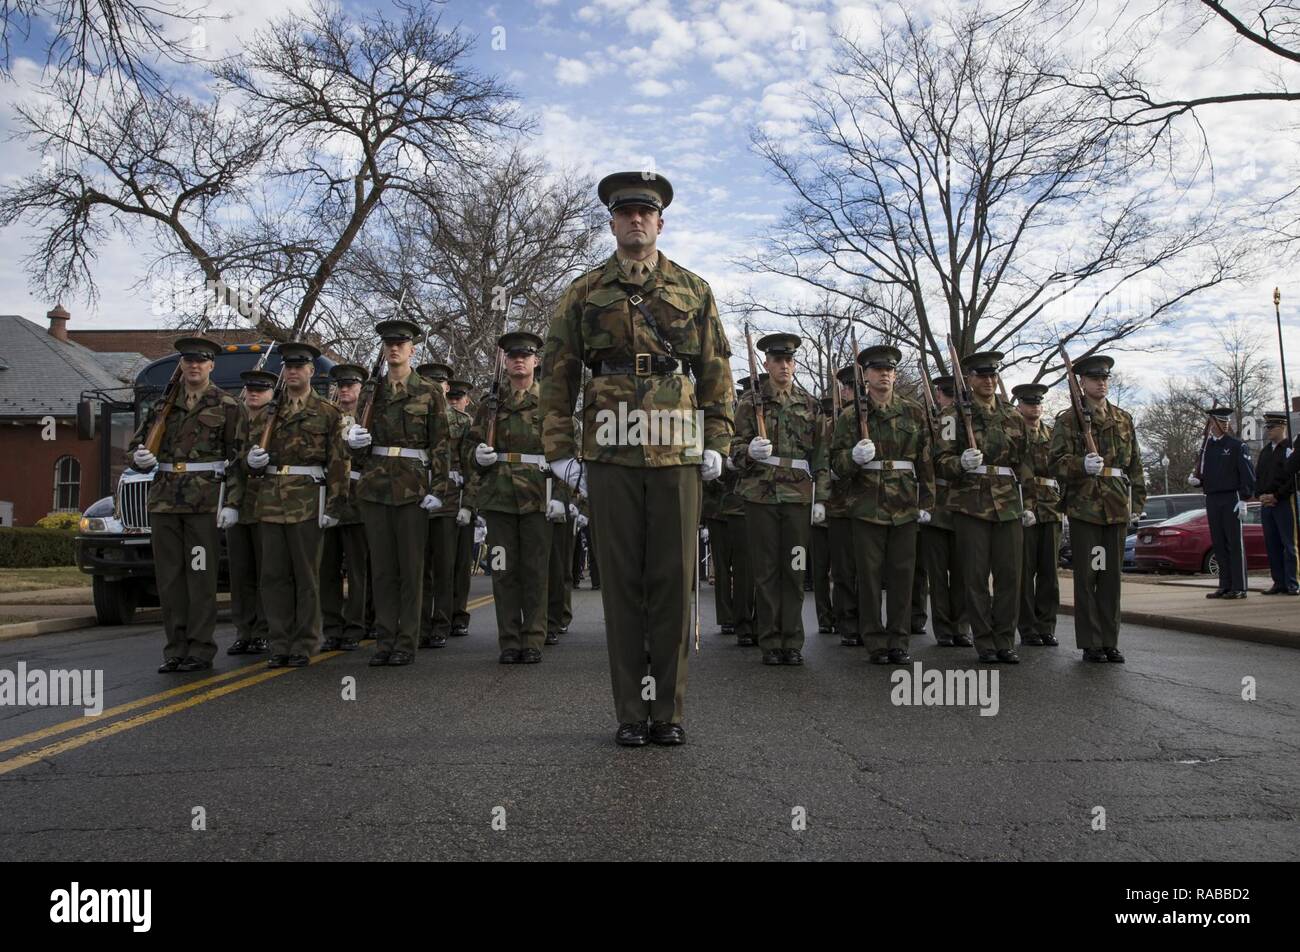 Members of the U.S. Marine Corps Honor Guard stand at attention before rehearsing for the 58th Presidential Escort on Joint Base Myer-Henderson Hall, Va., Jan. 12, 2017. More than 5,000 service members are providing military ceremonial support for the 58th Presidential Inauguration, a time honored tradition that dates back to 1789 when George Washington was escorted to Federal Hall in New York City to be sworn in as the first commander in chief. Stock Photo